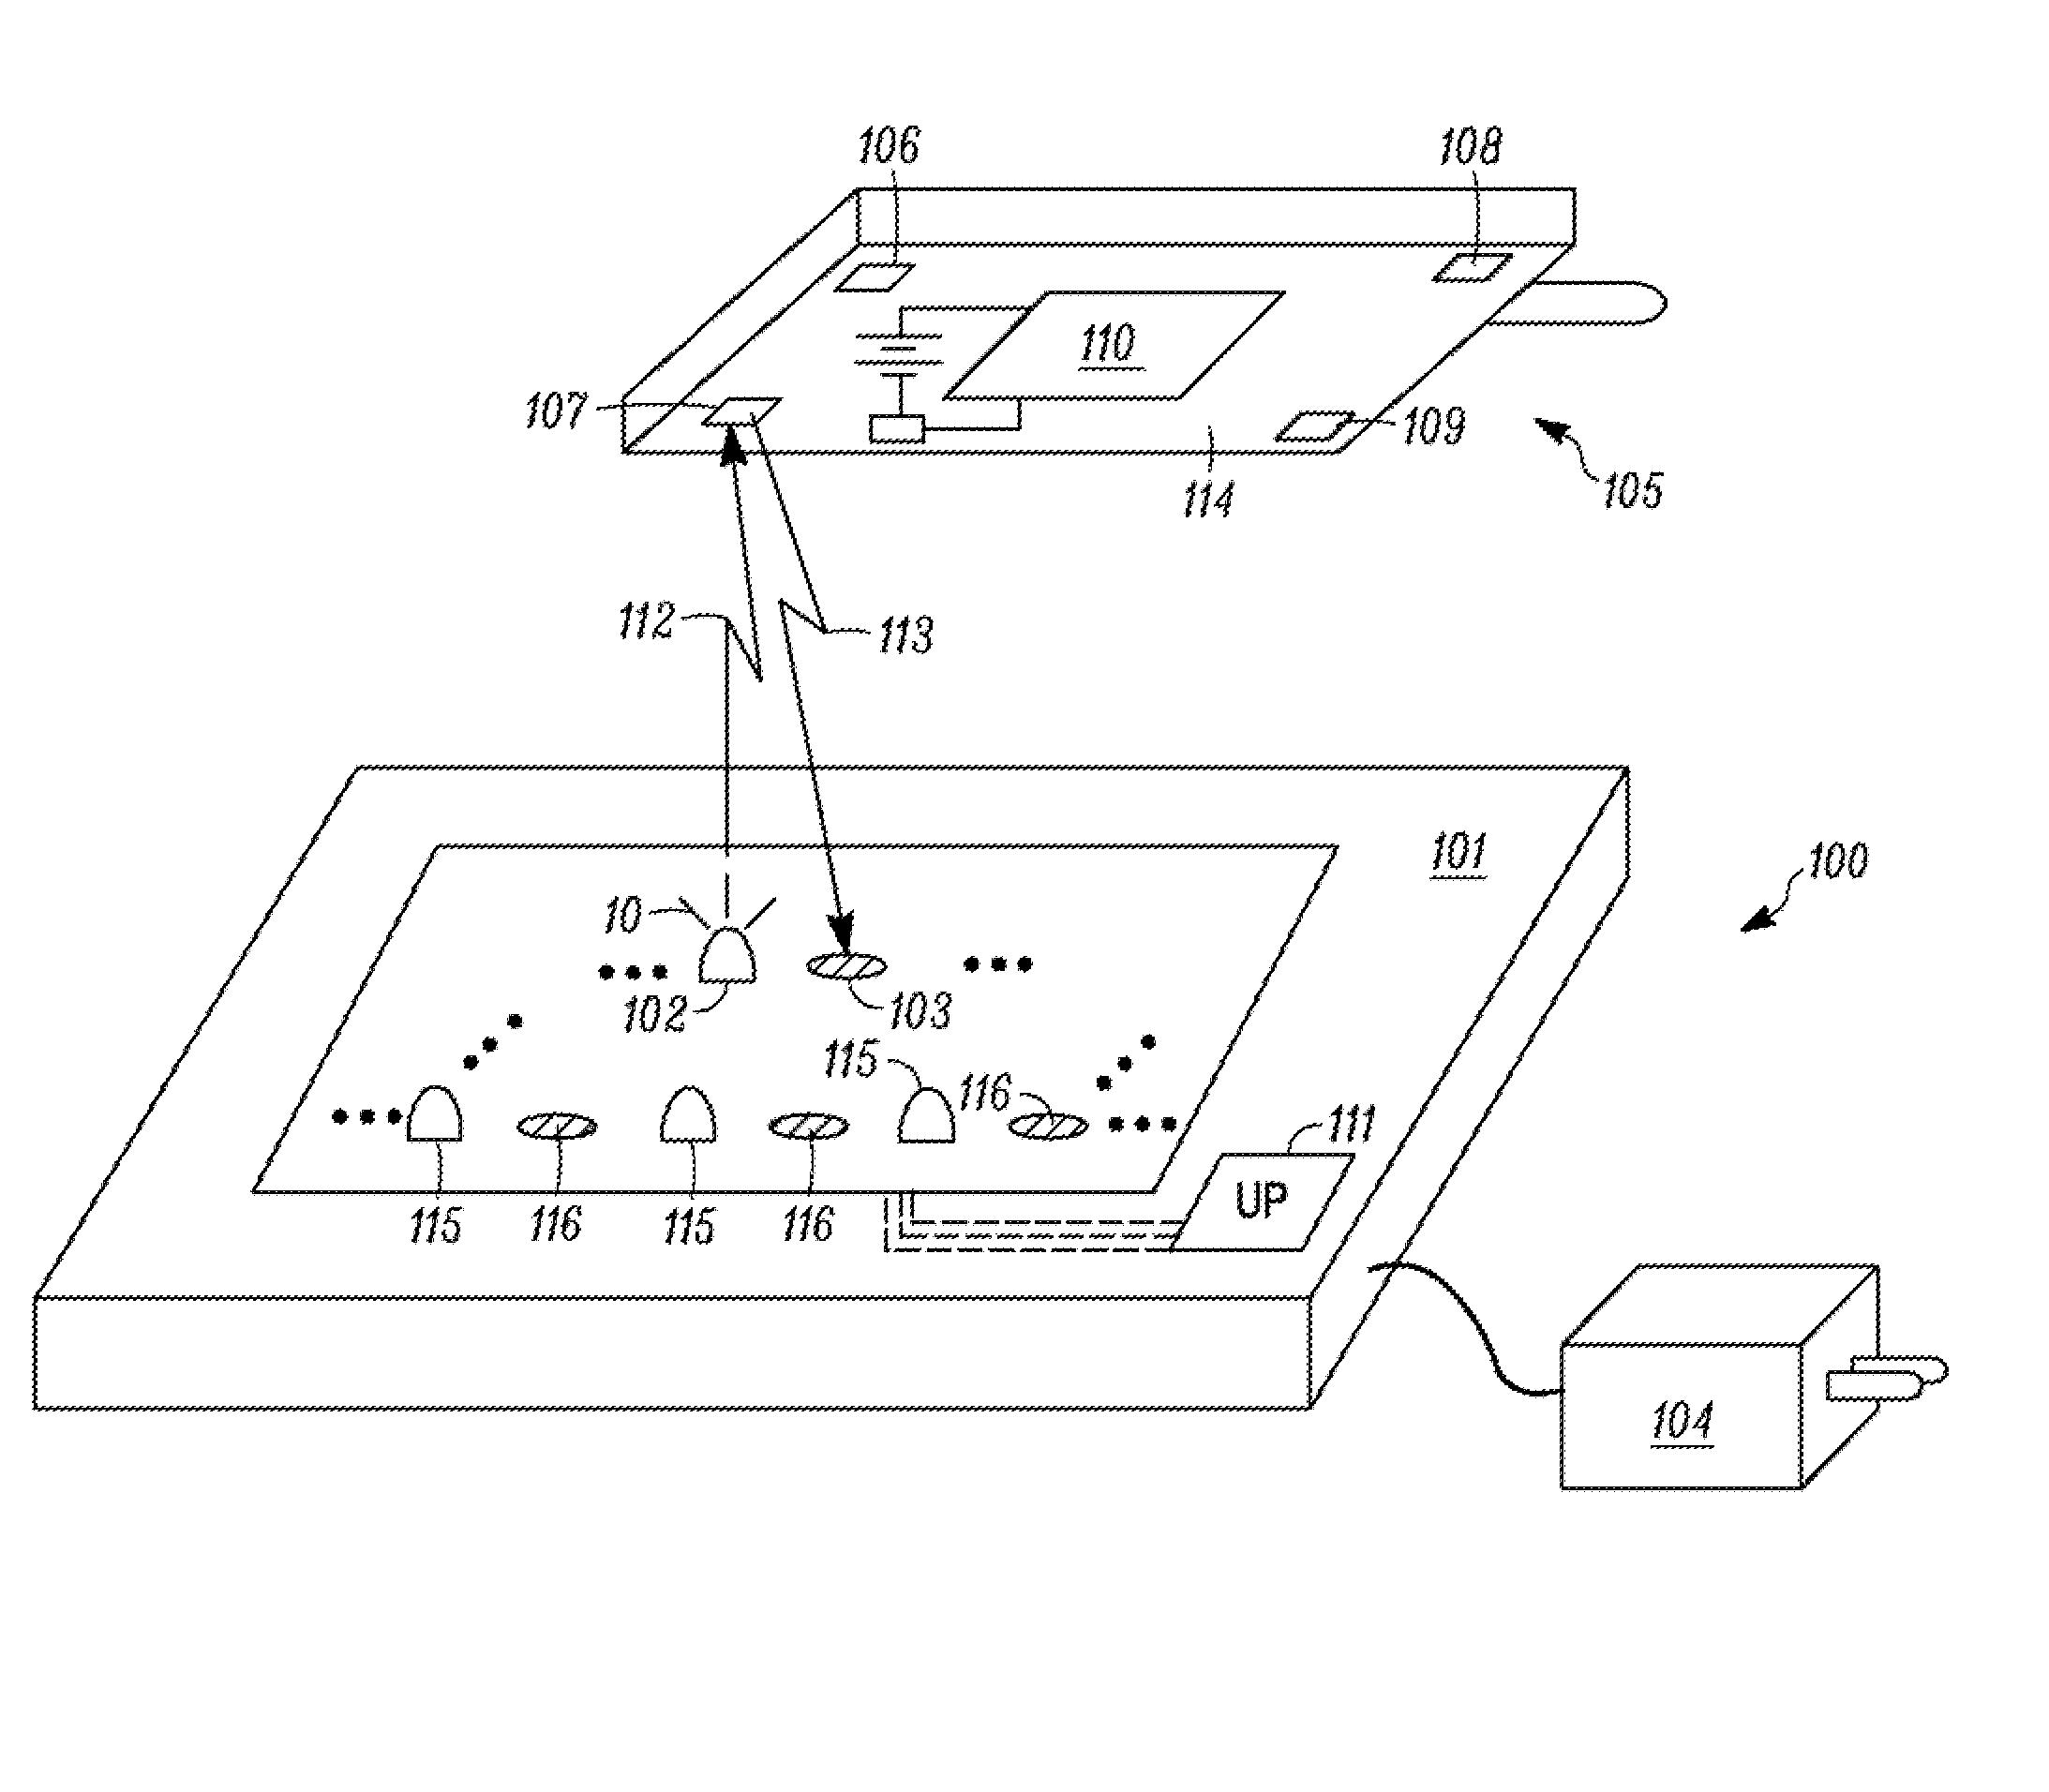 Light pad charger for electronic devices